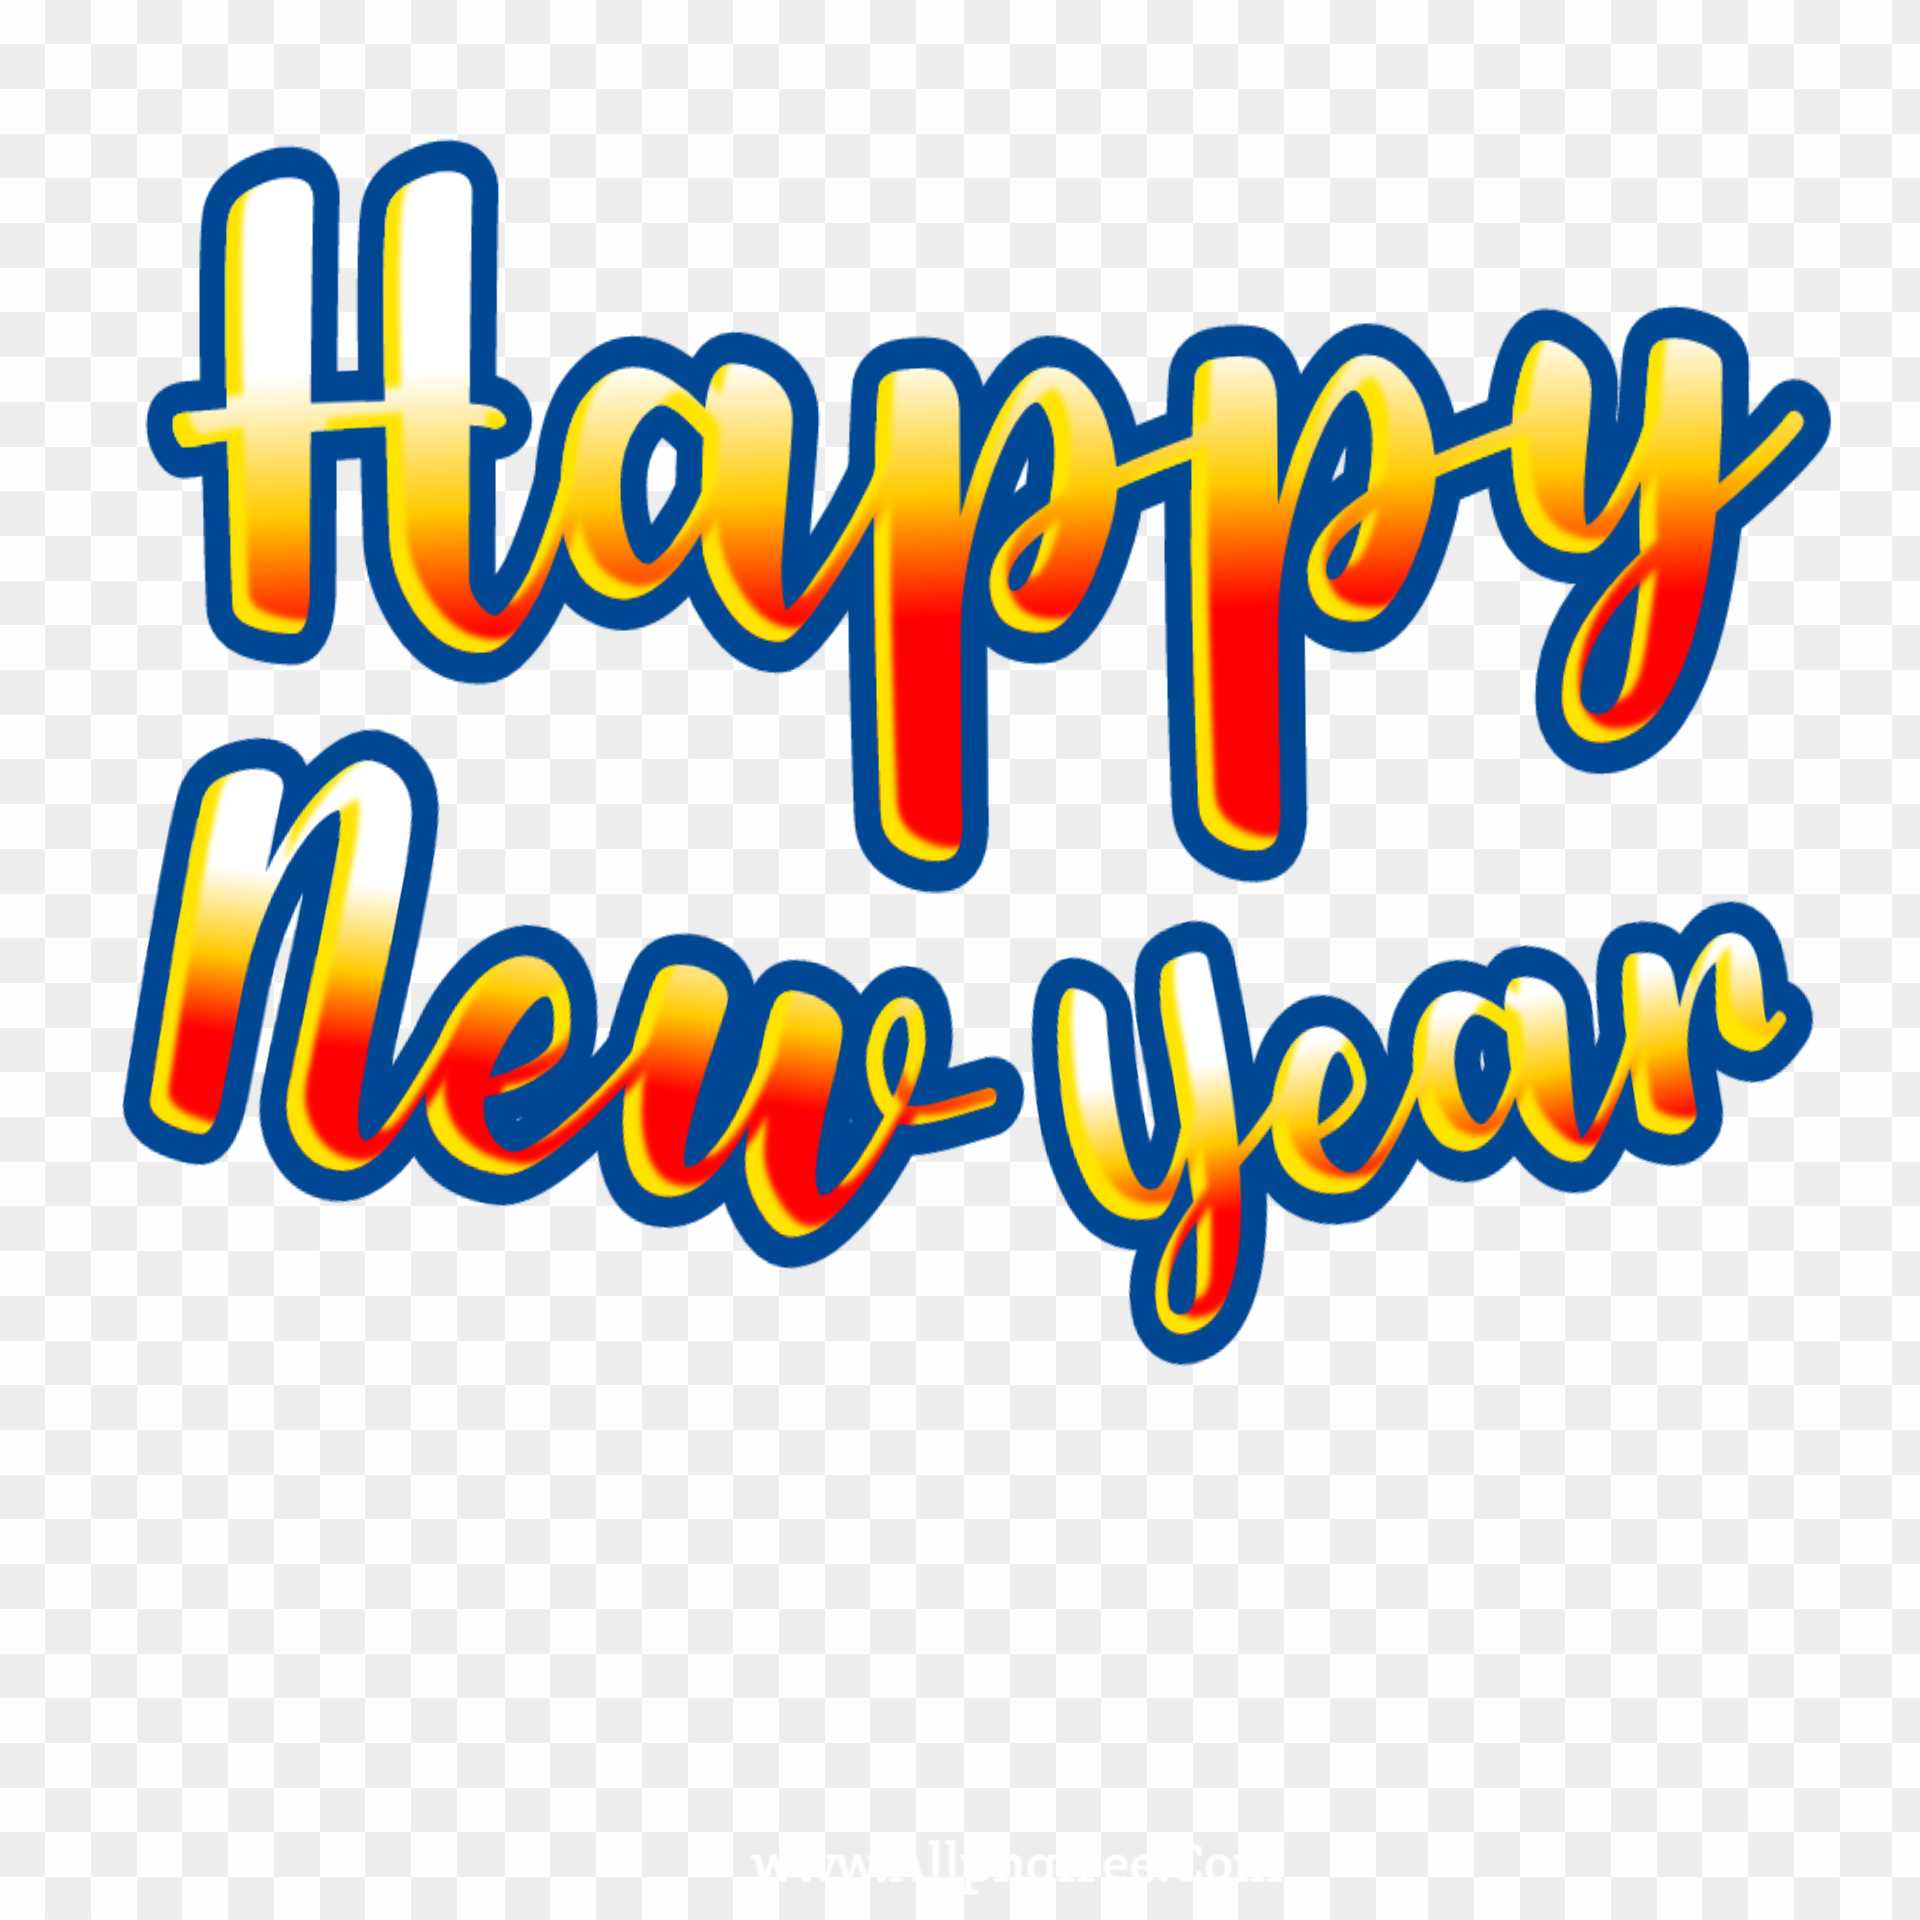 Happy New Year Text Design Vector PNG vector in SVG, PDF, AI, CDR format